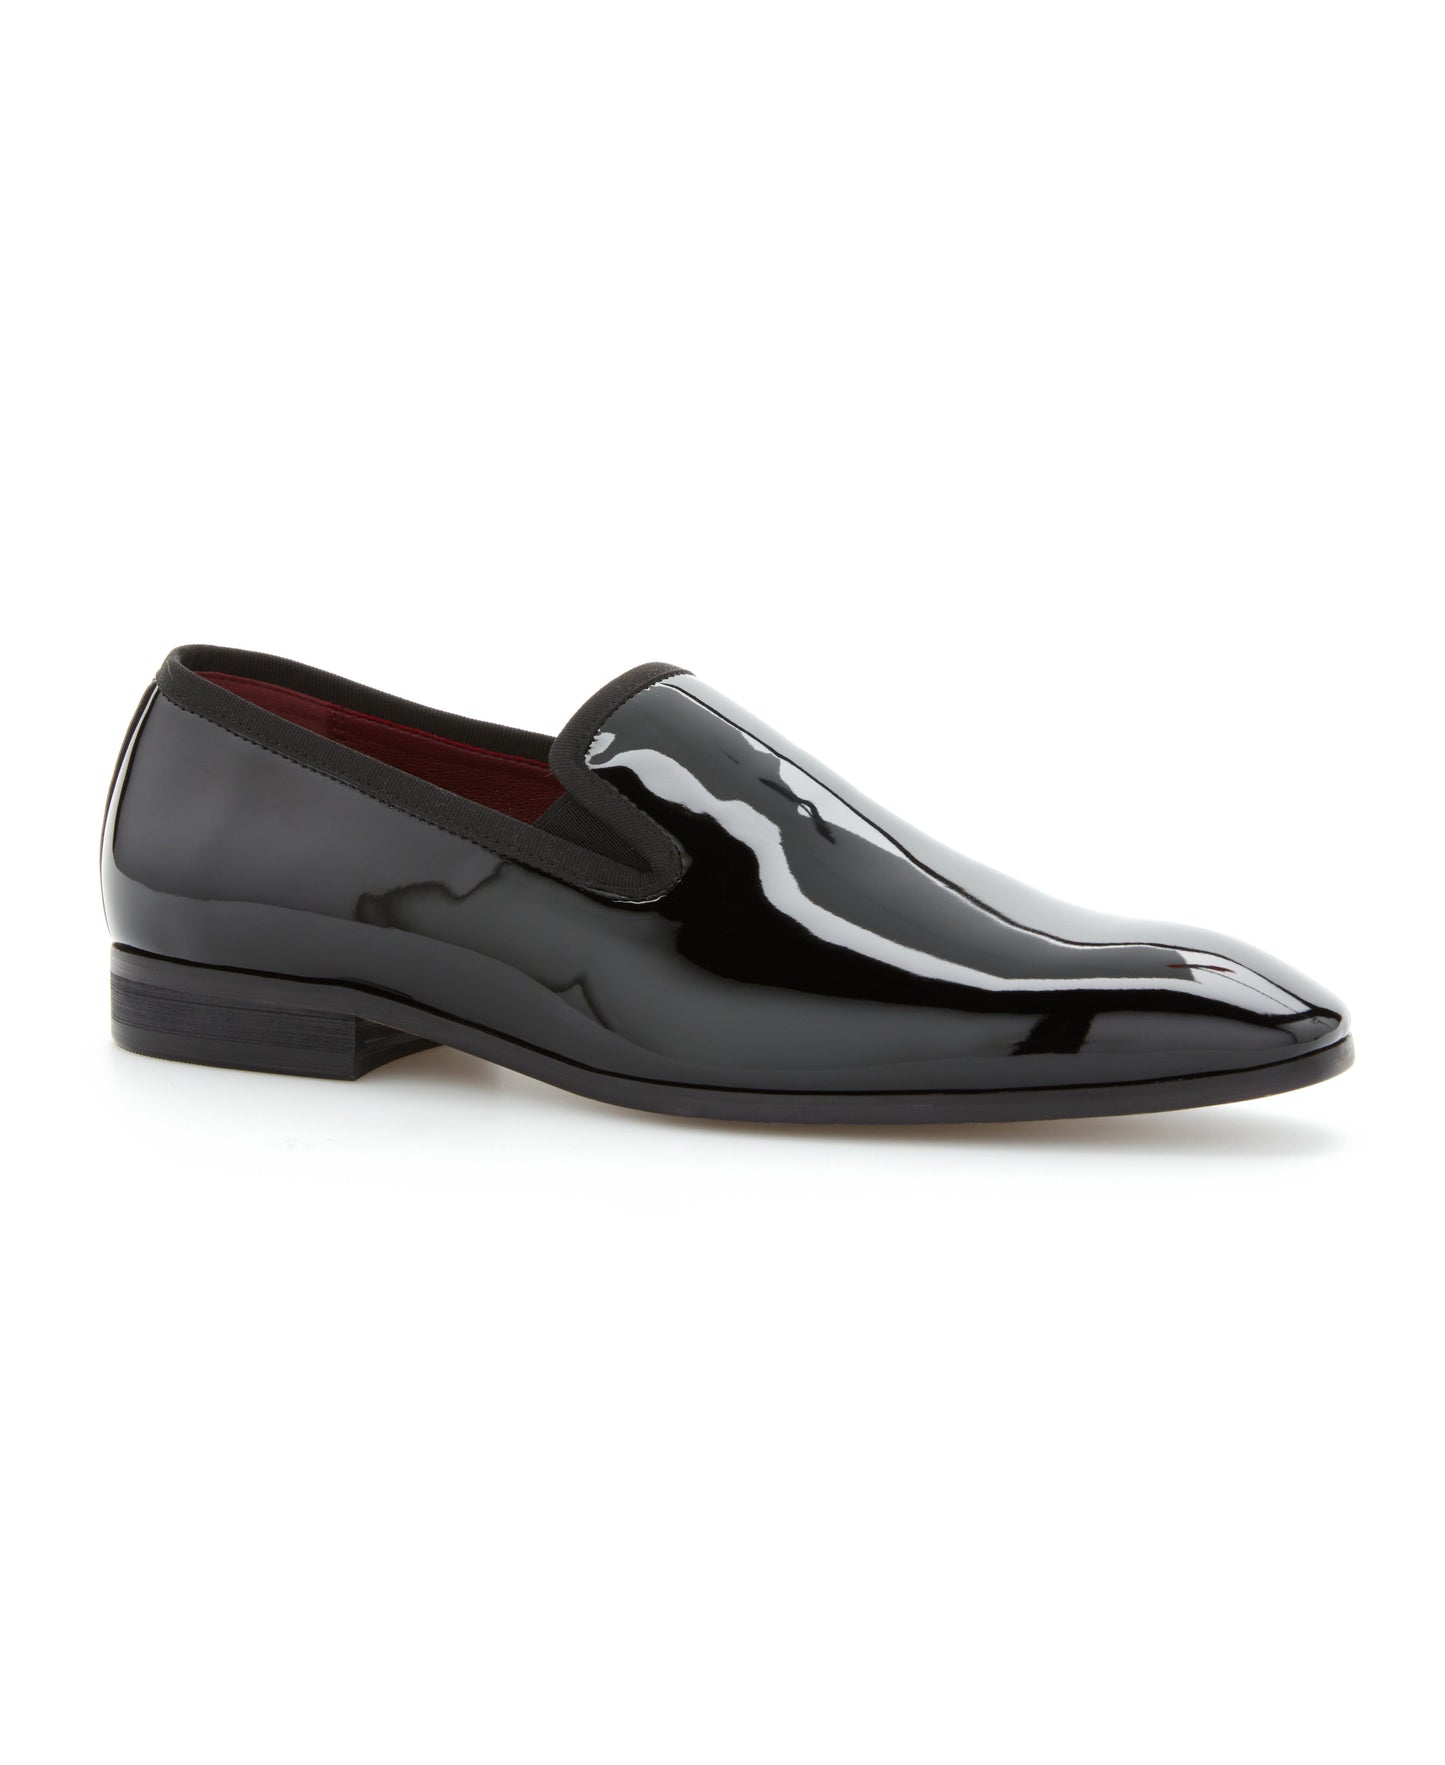 Patent Leather Slip-On Shoes